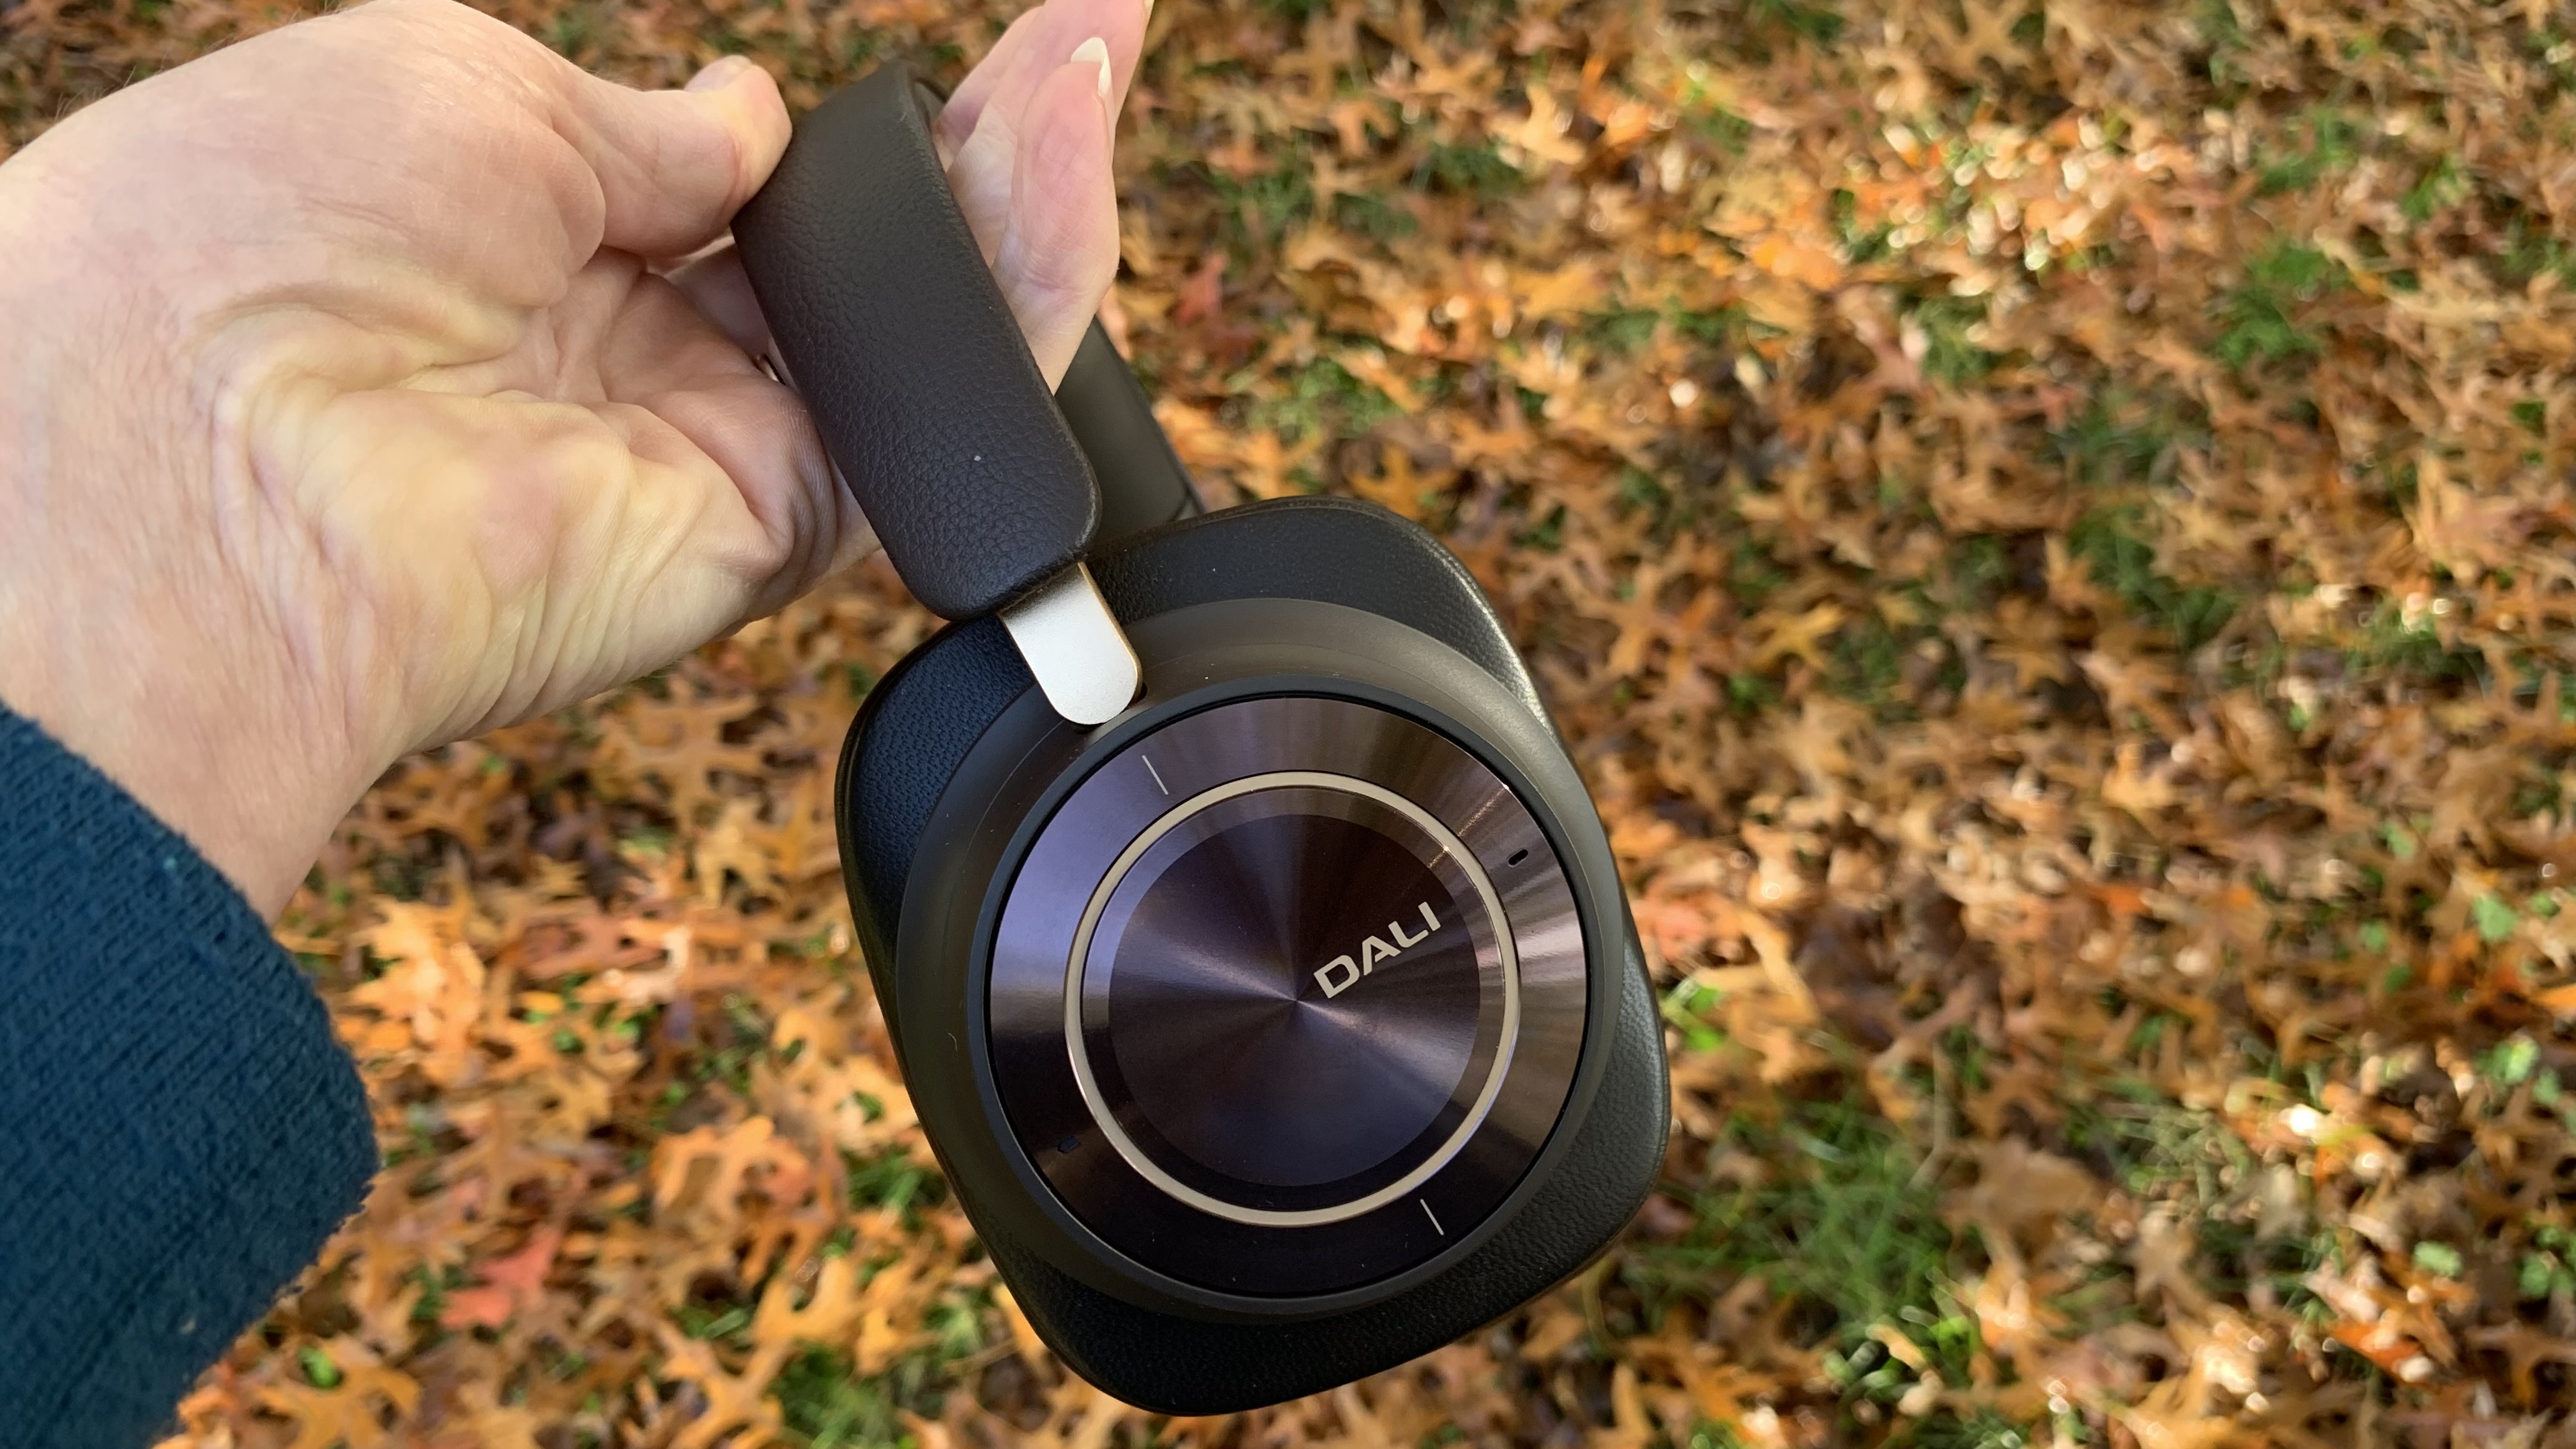 Dali iO-12 headphones held in a hand, with autumnal leaves in the background